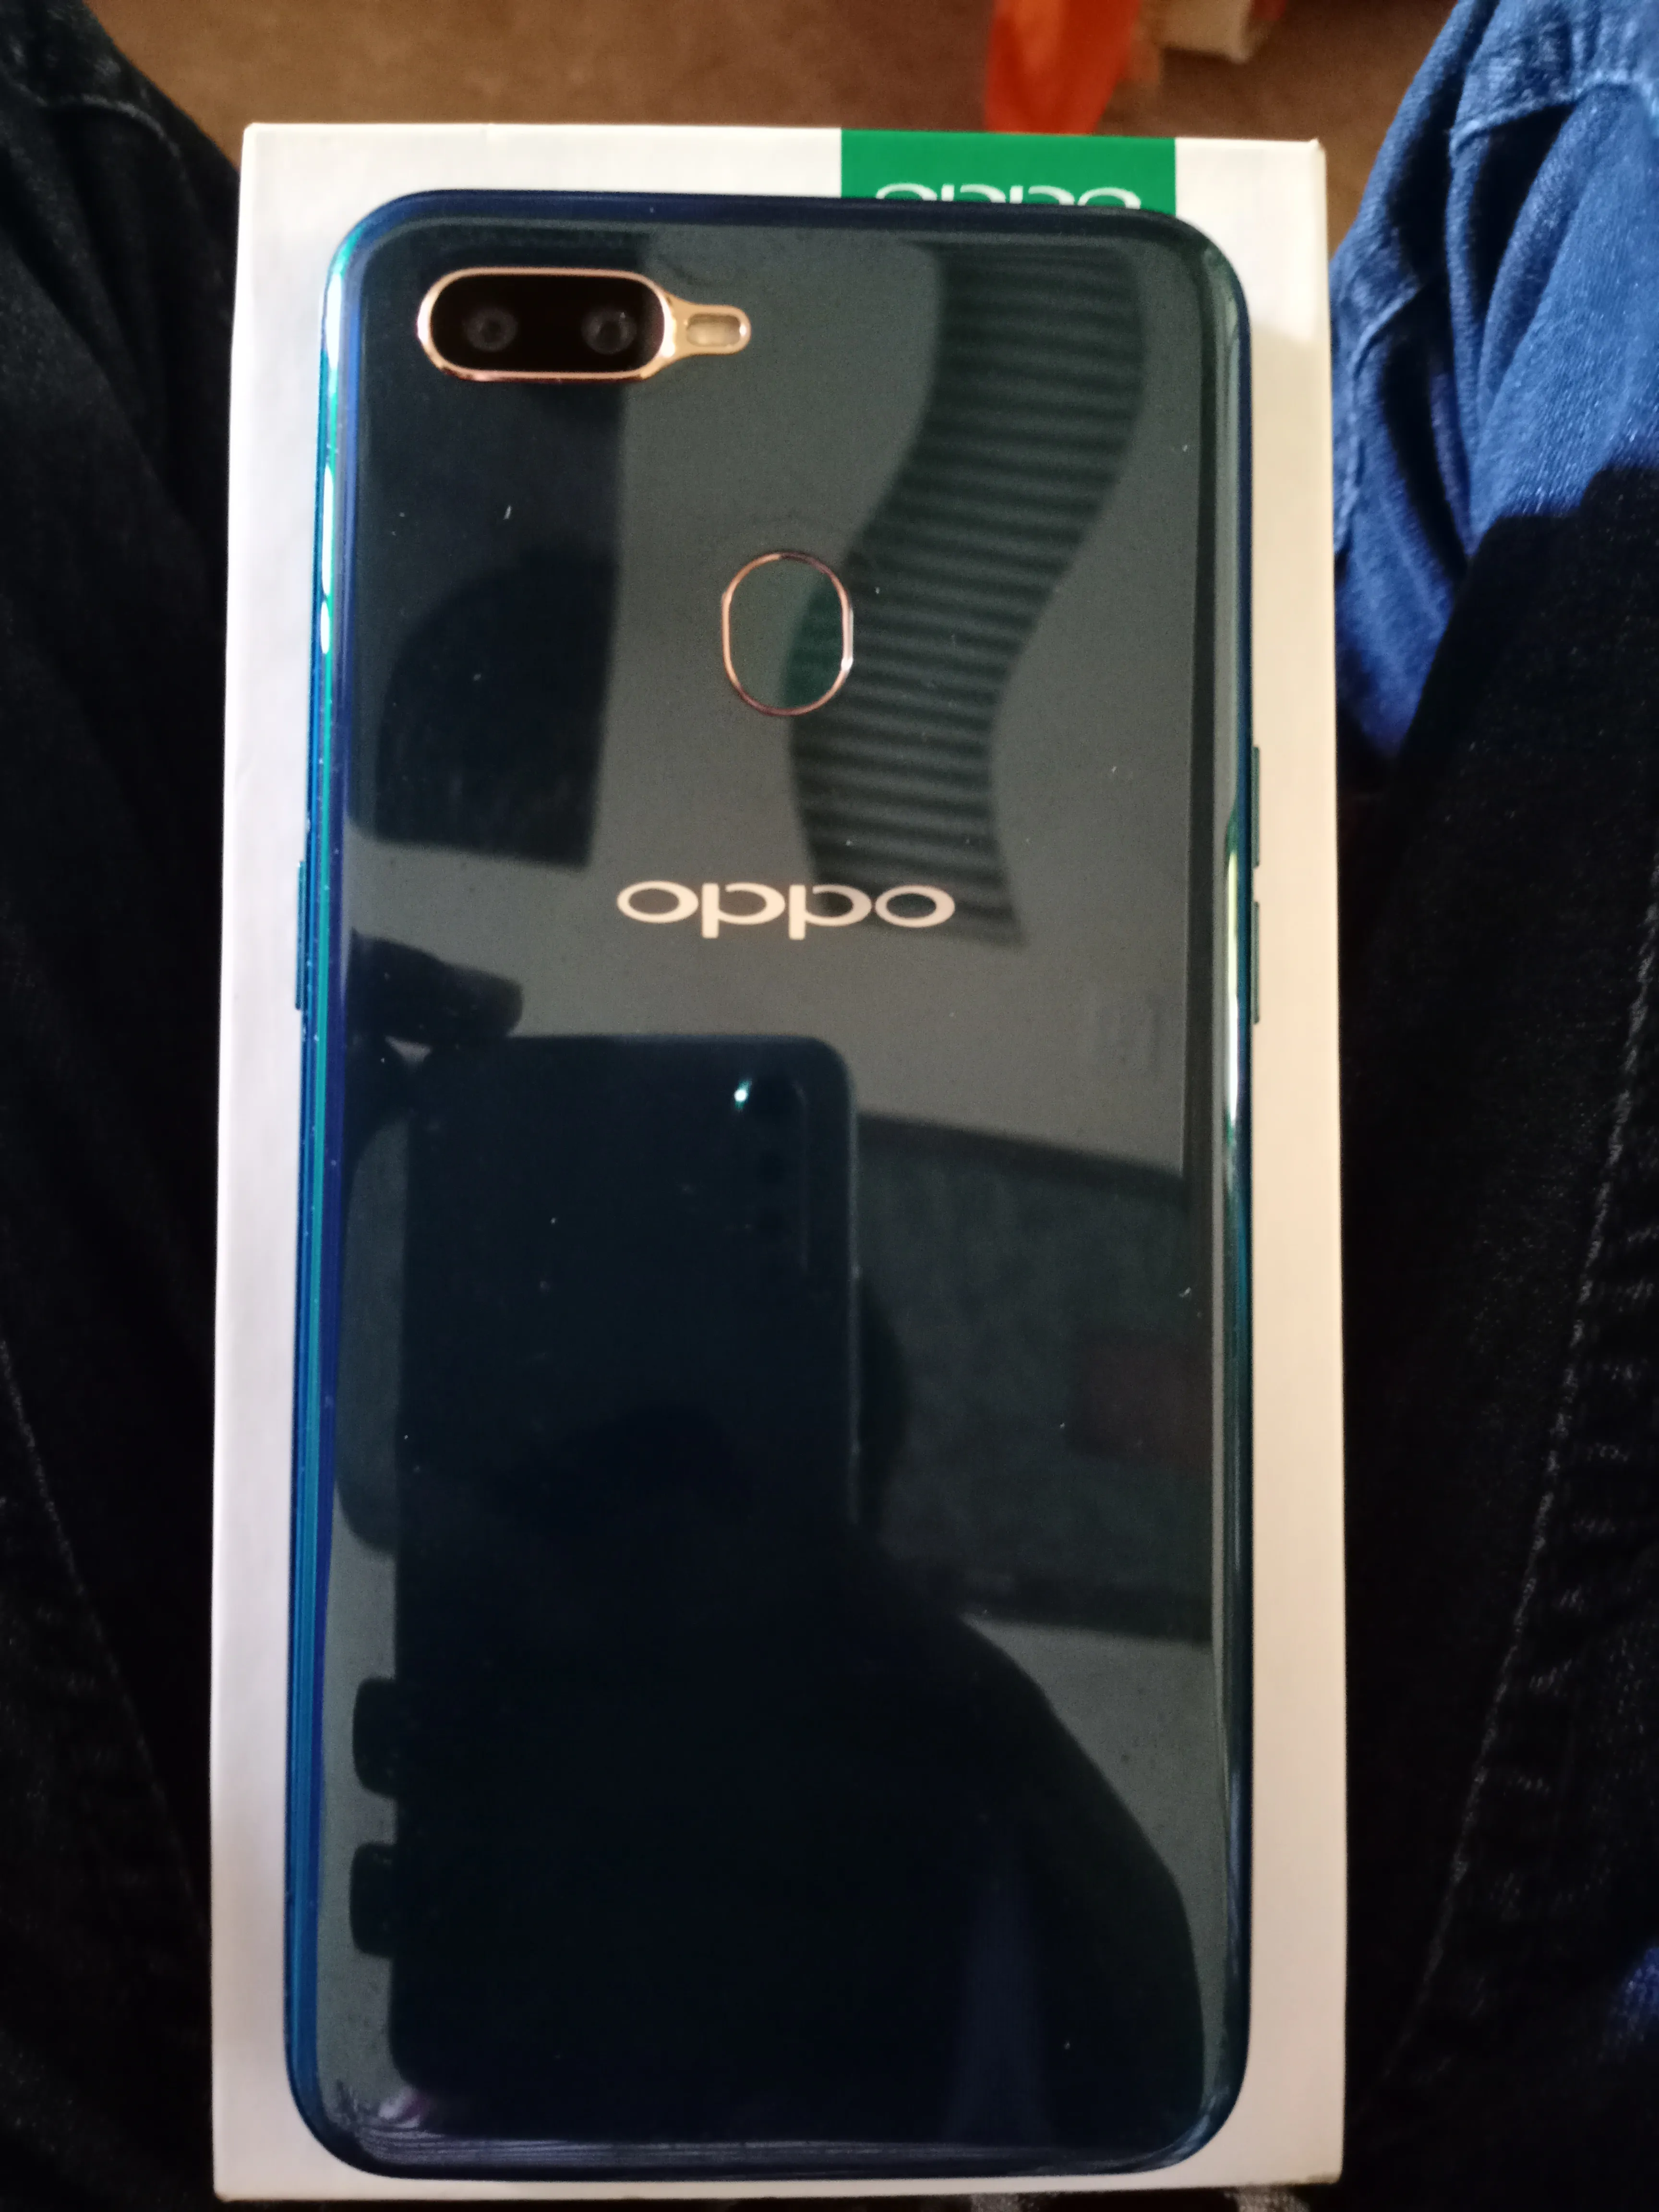 Oppo A7 in lush condition - photo 1